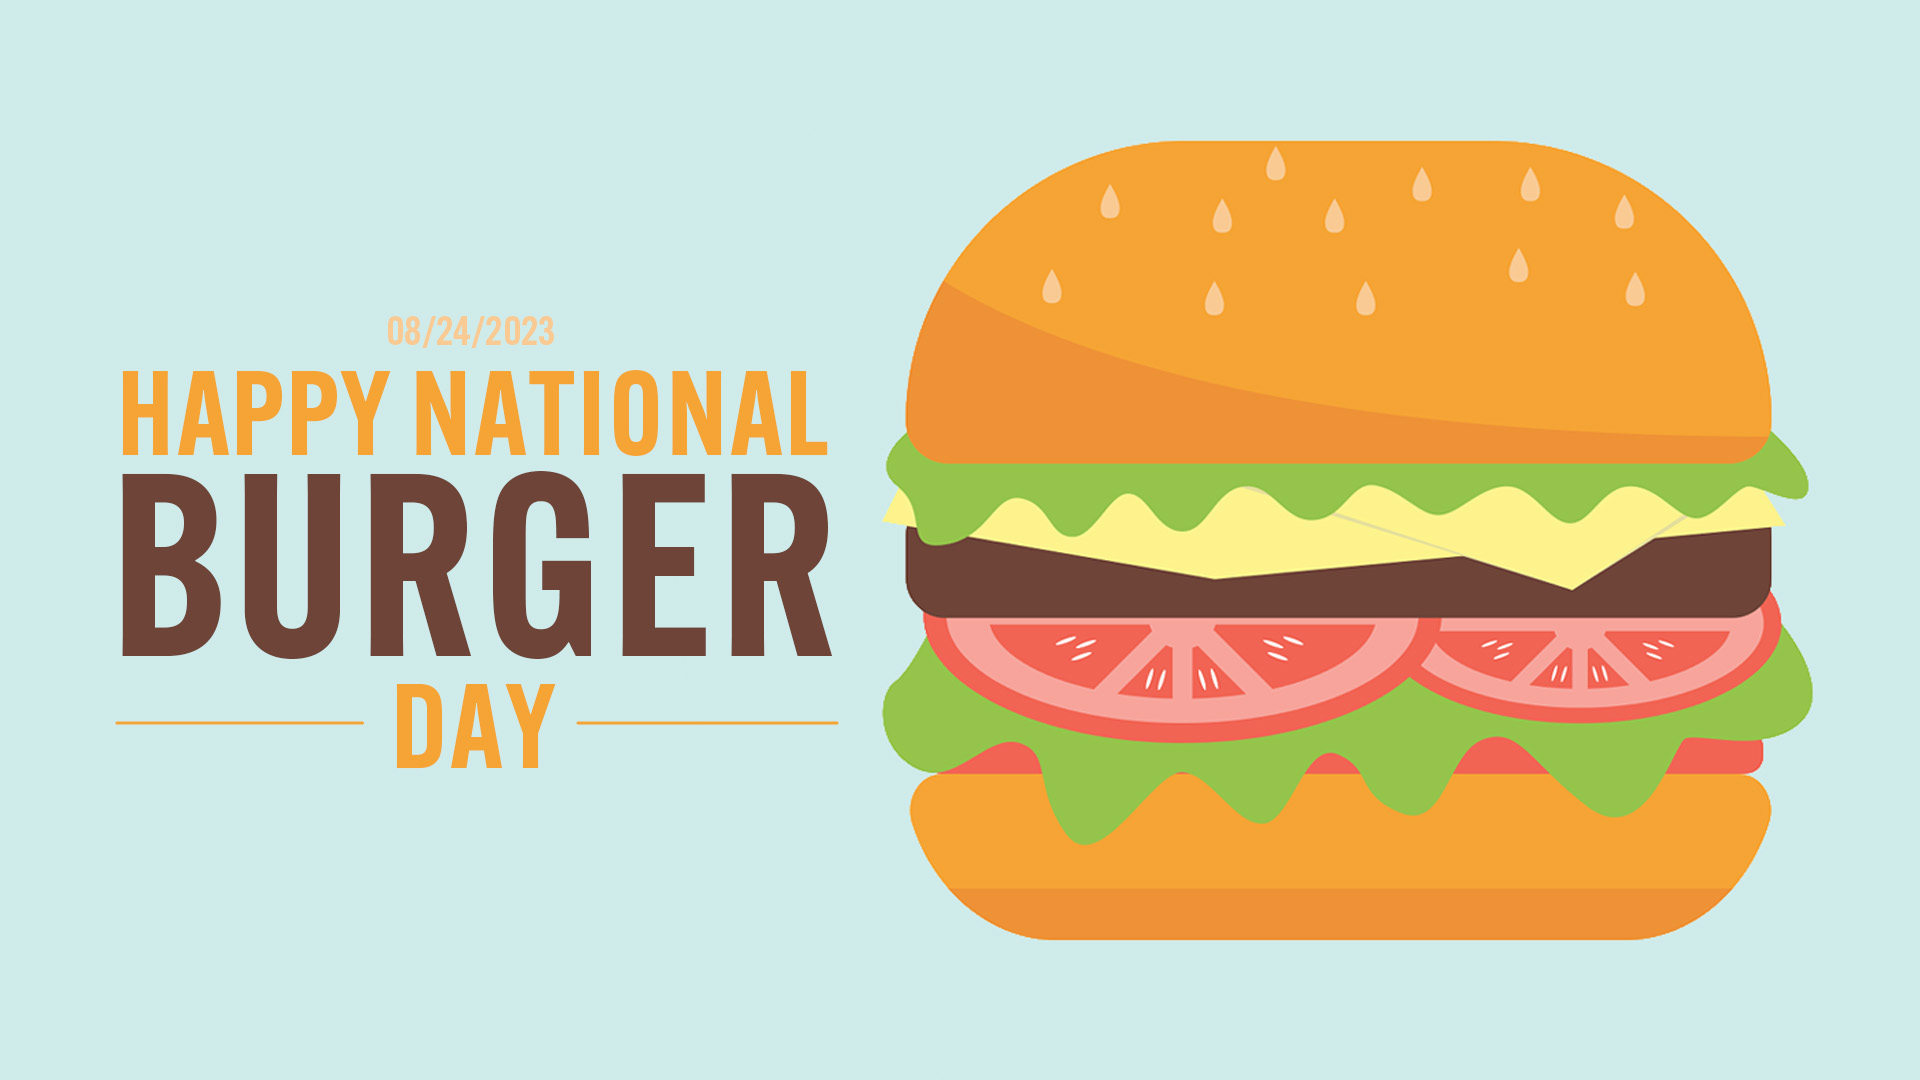 Background is light blue. To the right of the images there is a large scale illustrated images of a burger with lettuce, cheese, burger, tomatoes, lettuce and ketchup. Towards the left of the screen 08/24/2023 Happy National Burger Day is written in a thick condensed font.